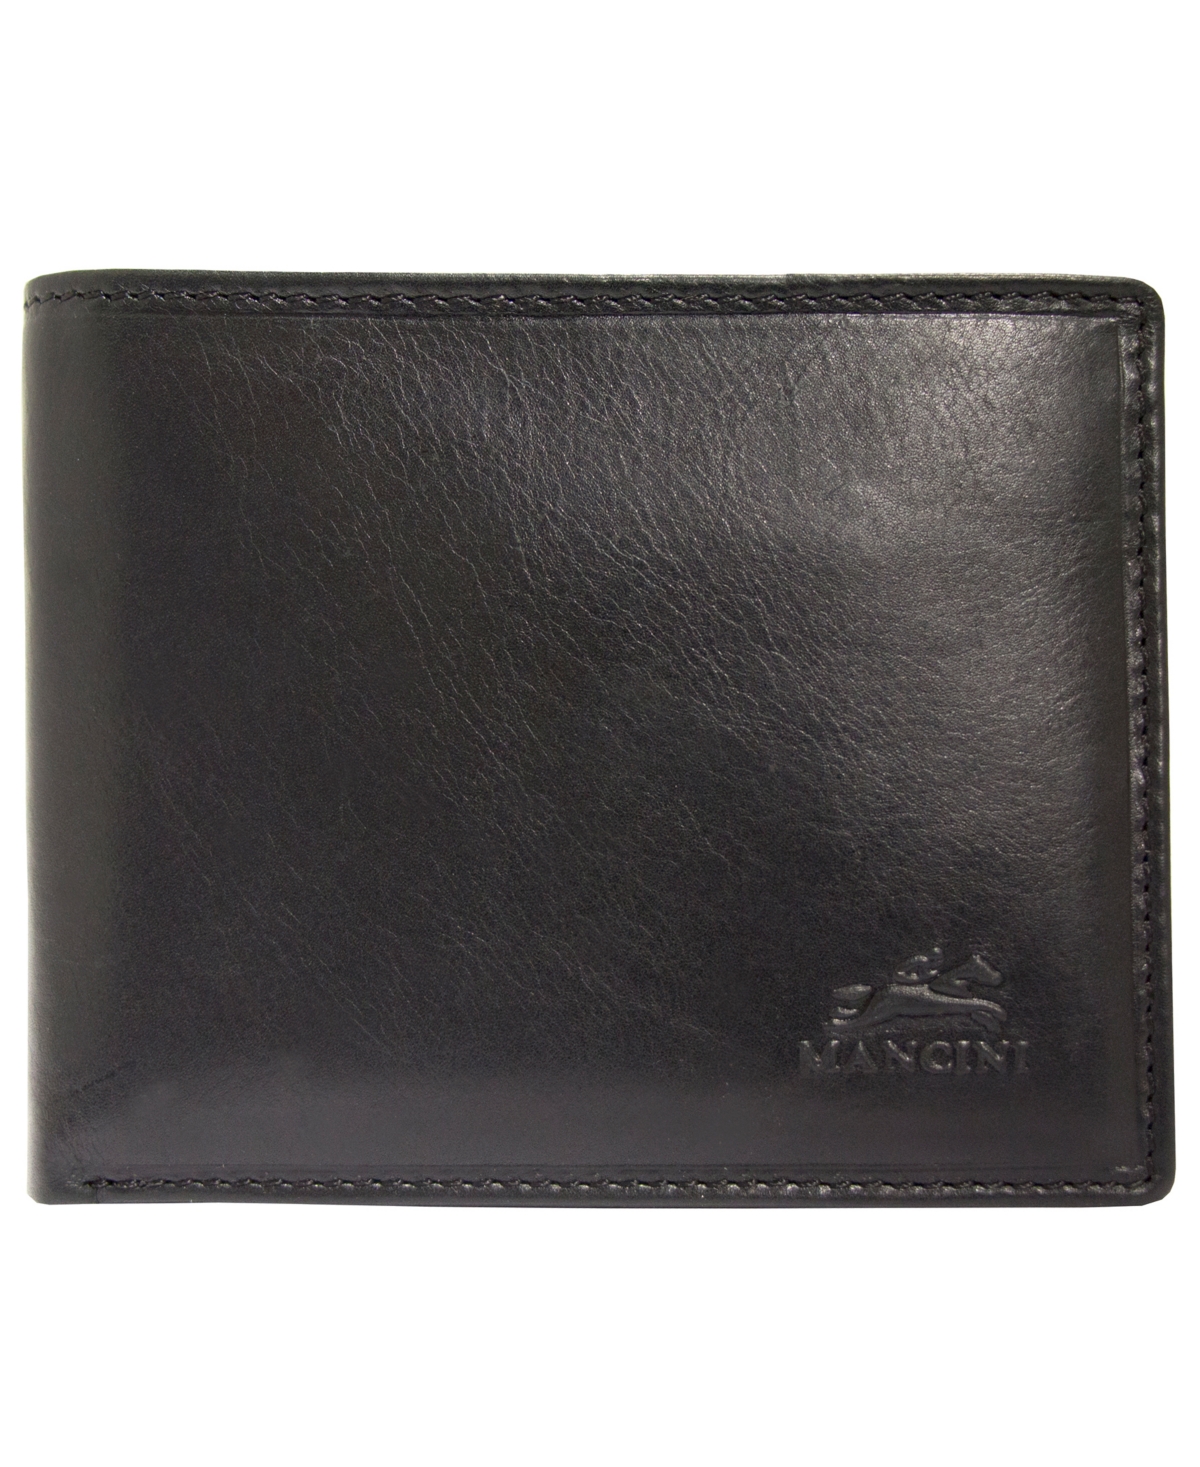 Men's Mancini Boulder Collection Rfid Secure Wallet with Removable Passcase and Coin Pocket - Black